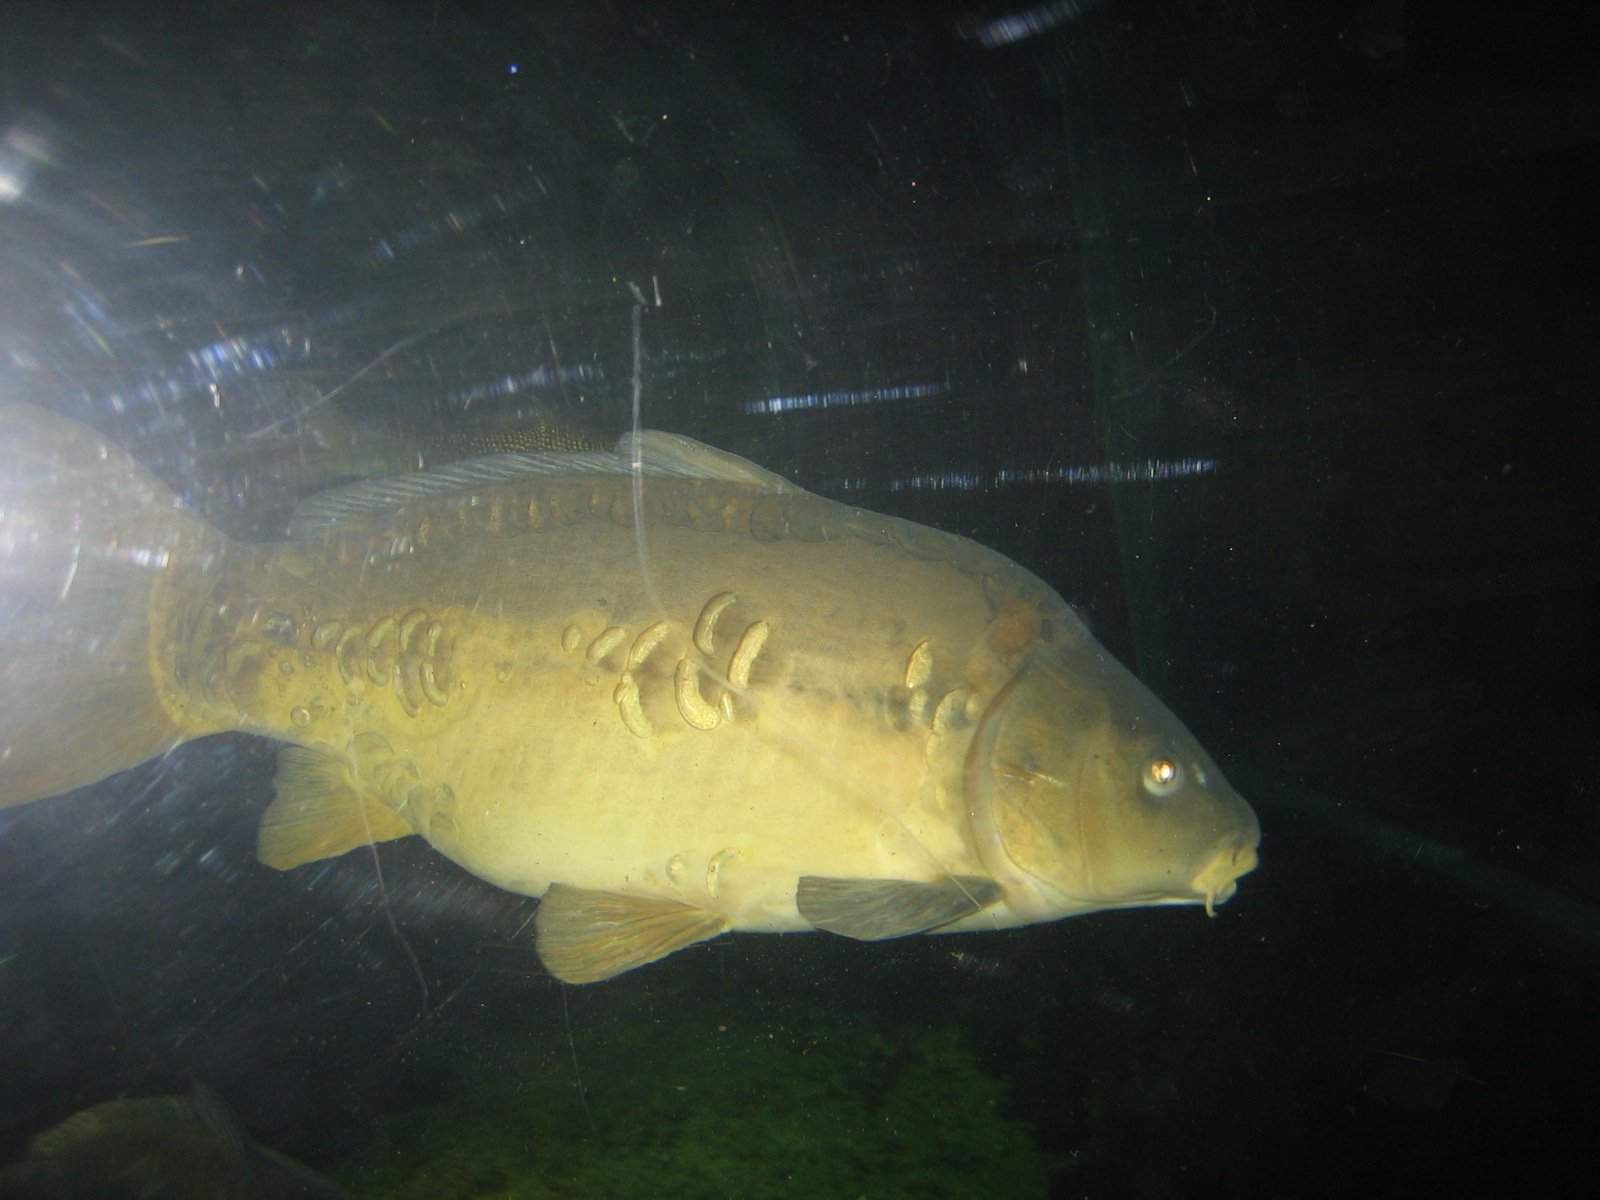 Photo shows a Carp Swimming Midwater Depth